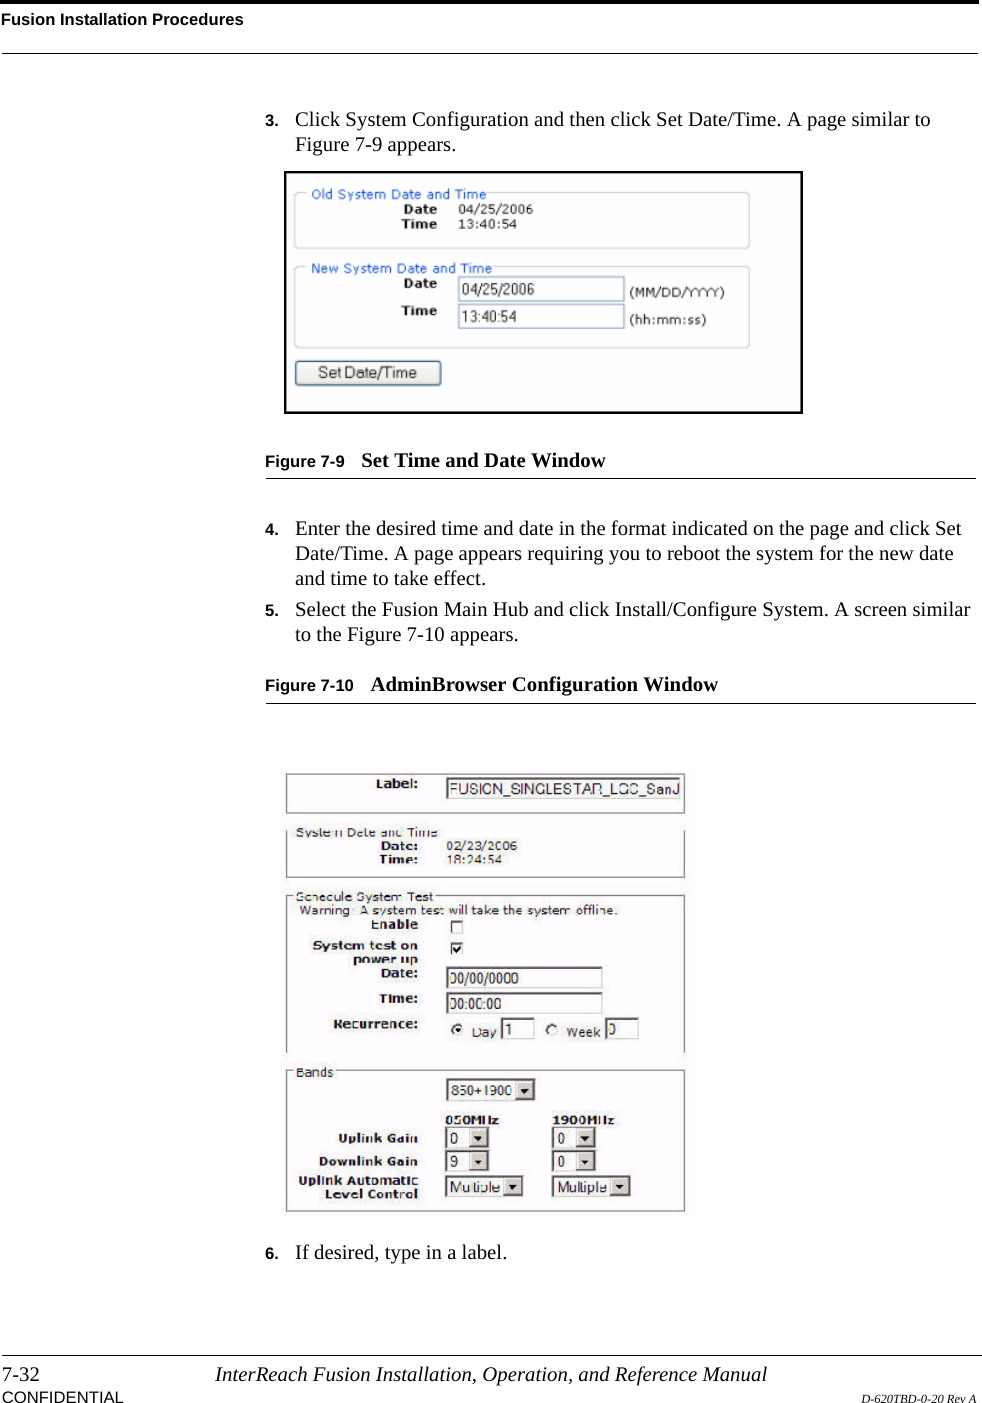 Fusion Installation Procedures7-32 InterReach Fusion Installation, Operation, and Reference ManualCONFIDENTIAL D-620TBD-0-20 Rev A3. Click System Configuration and then click Set Date/Time. A page similar to Figure 7-9 appears.Figure 7-9 Set Time and Date Window4. Enter the desired time and date in the format indicated on the page and click Set Date/Time. A page appears requiring you to reboot the system for the new date and time to take effect.5. Select the Fusion Main Hub and click Install/Configure System. A screen similar to the Figure 7-10 appears.Figure 7-10 AdminBrowser Configuration Window6. If desired, type in a label.